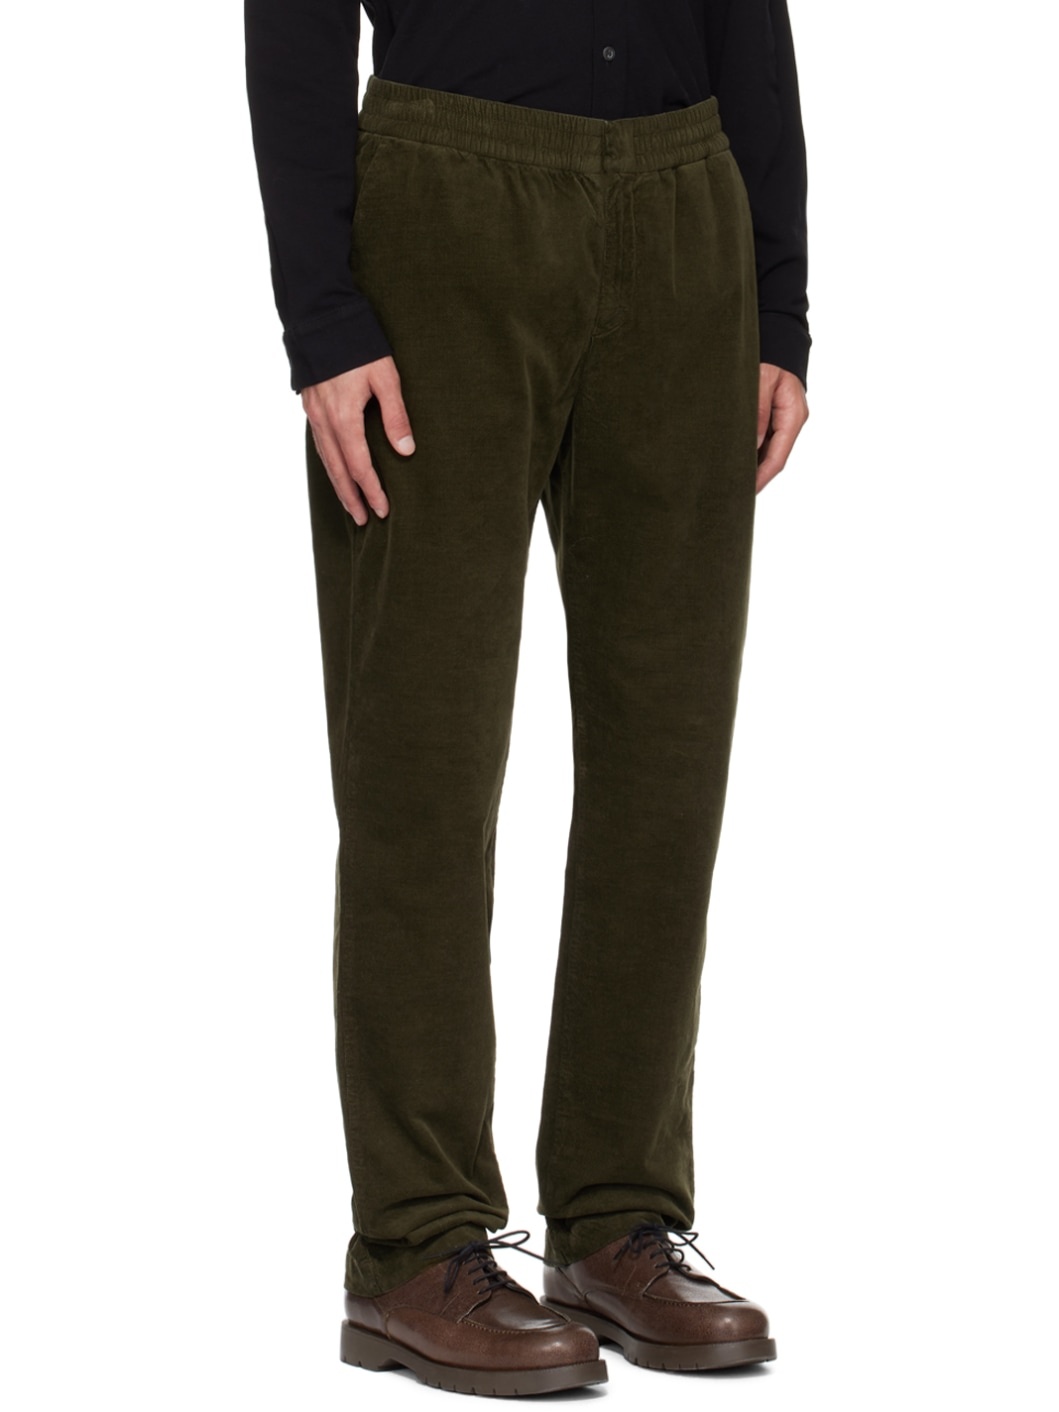 Khaki Relaxed-Fit Trousers - 2